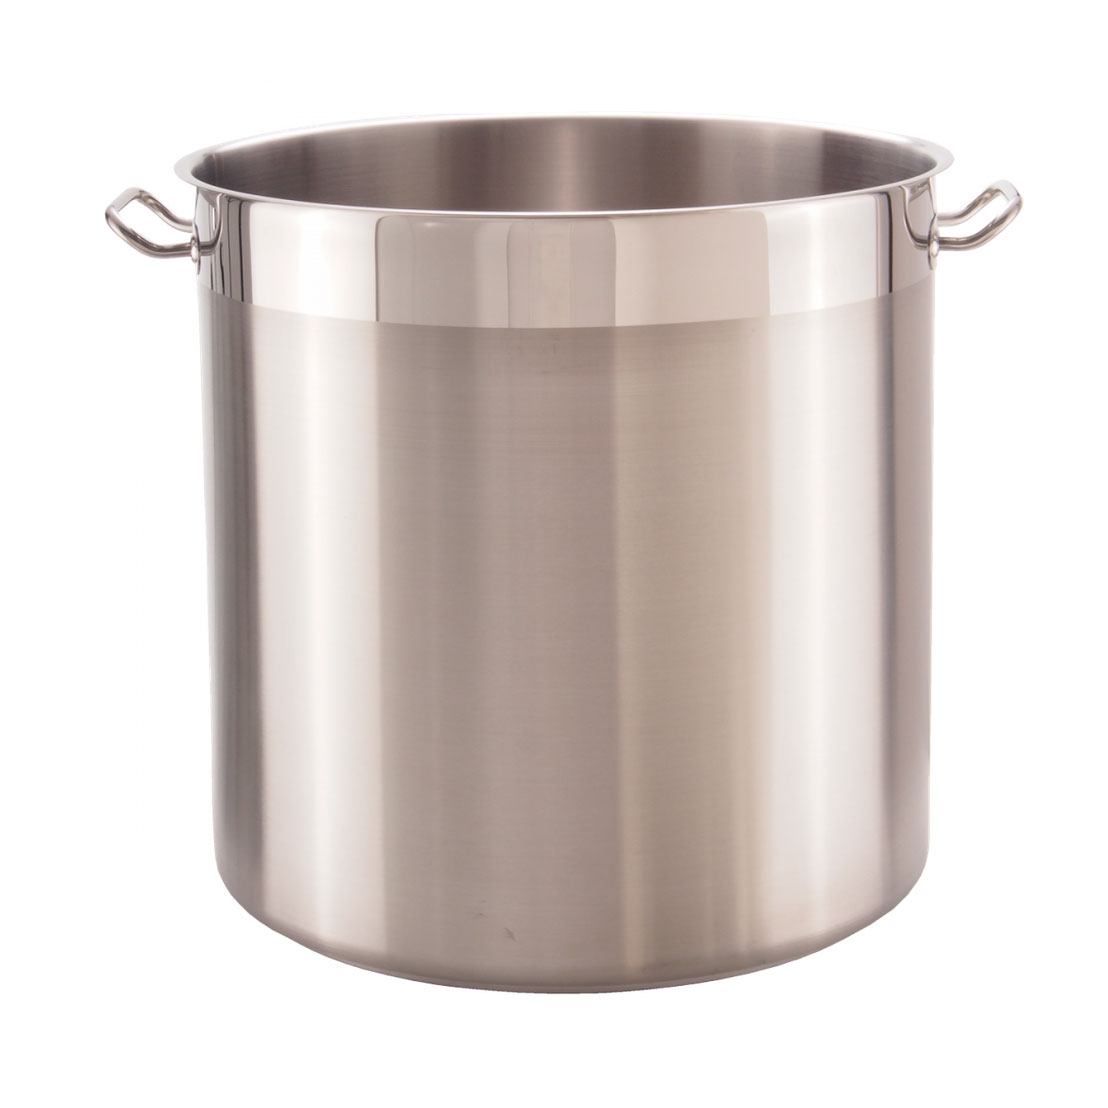 Libertyware SSPOT26WC Induction Stock Pot, 26 qt., with cover, stainless steel